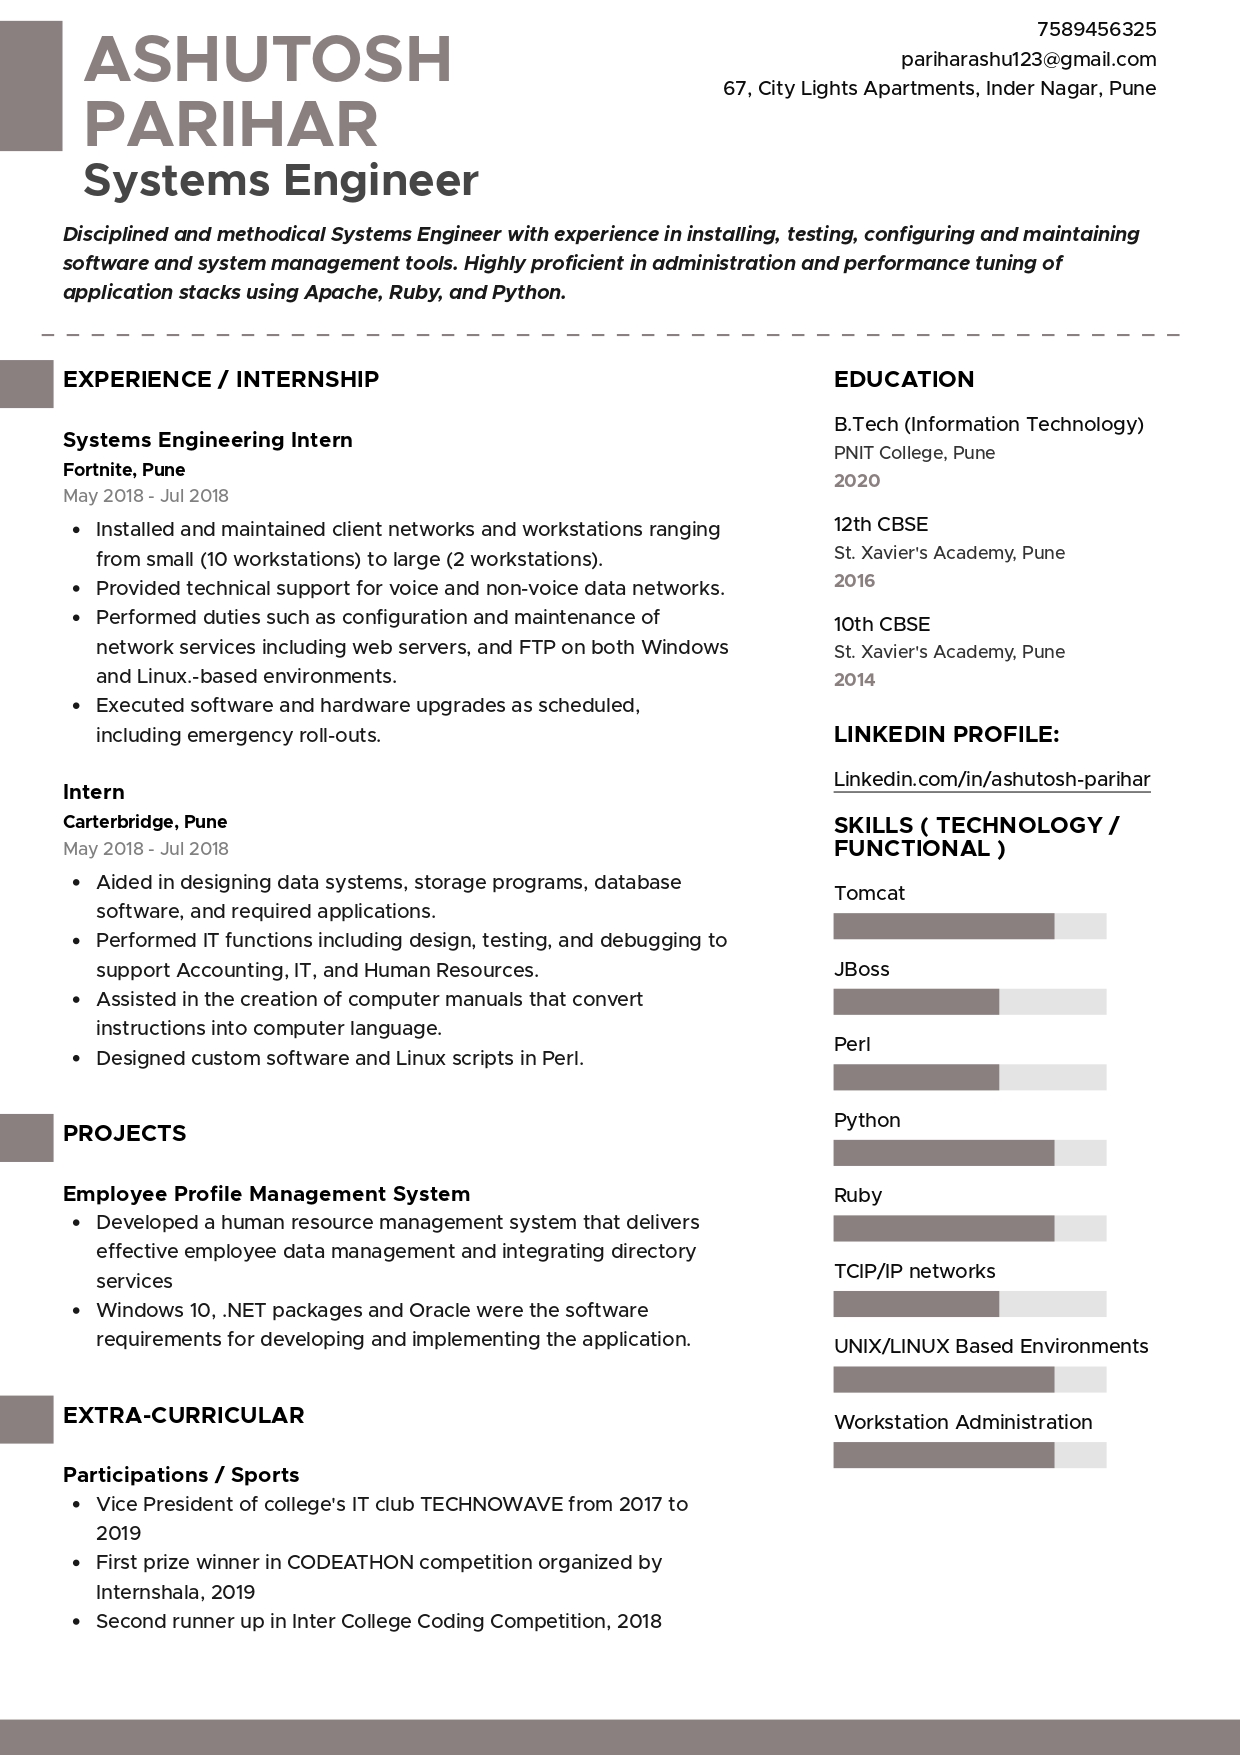 Sample Resume of Systems Engineer | Free Resume Templates & Samples on Resumod.co